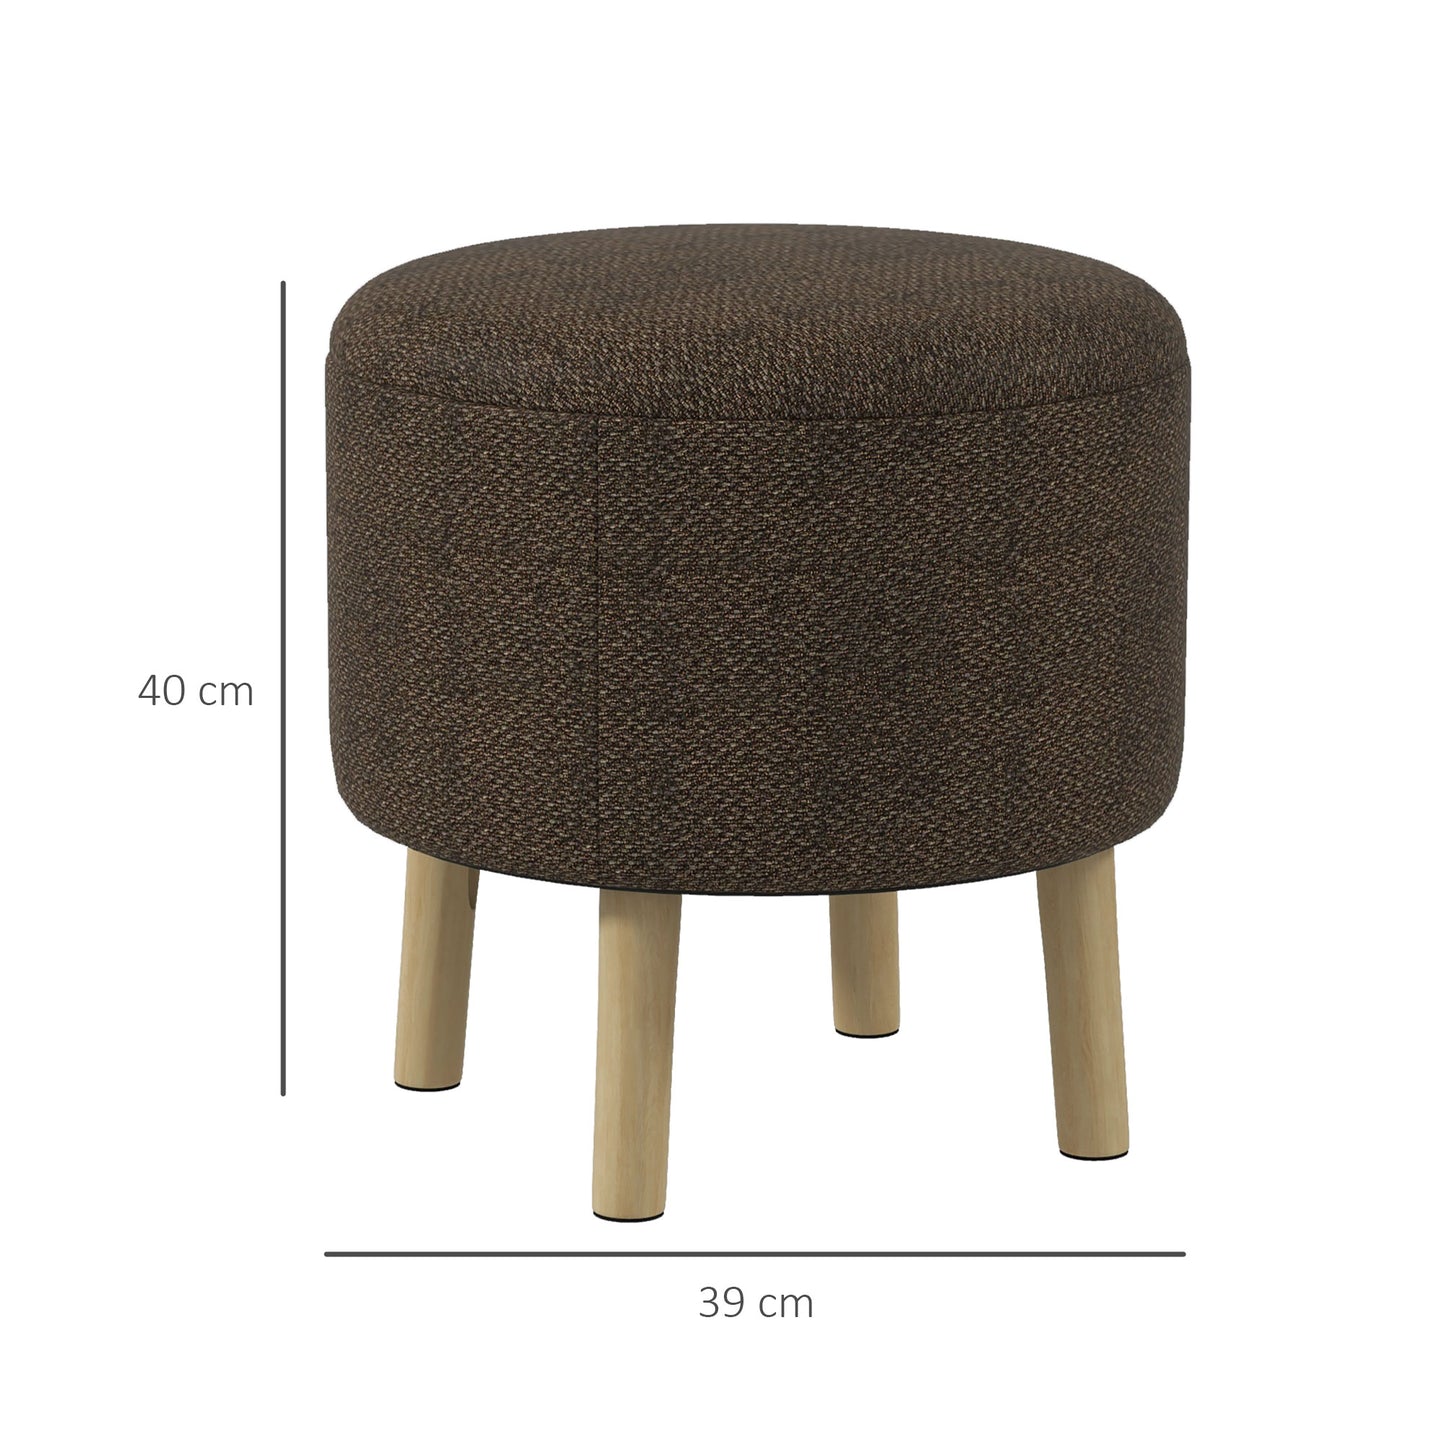 HOMCOM Round Ottoman Stool with Storage, Linen Fabric Upholstered Foot Stool with Padded Seat, Hidden Space and Wood Legs